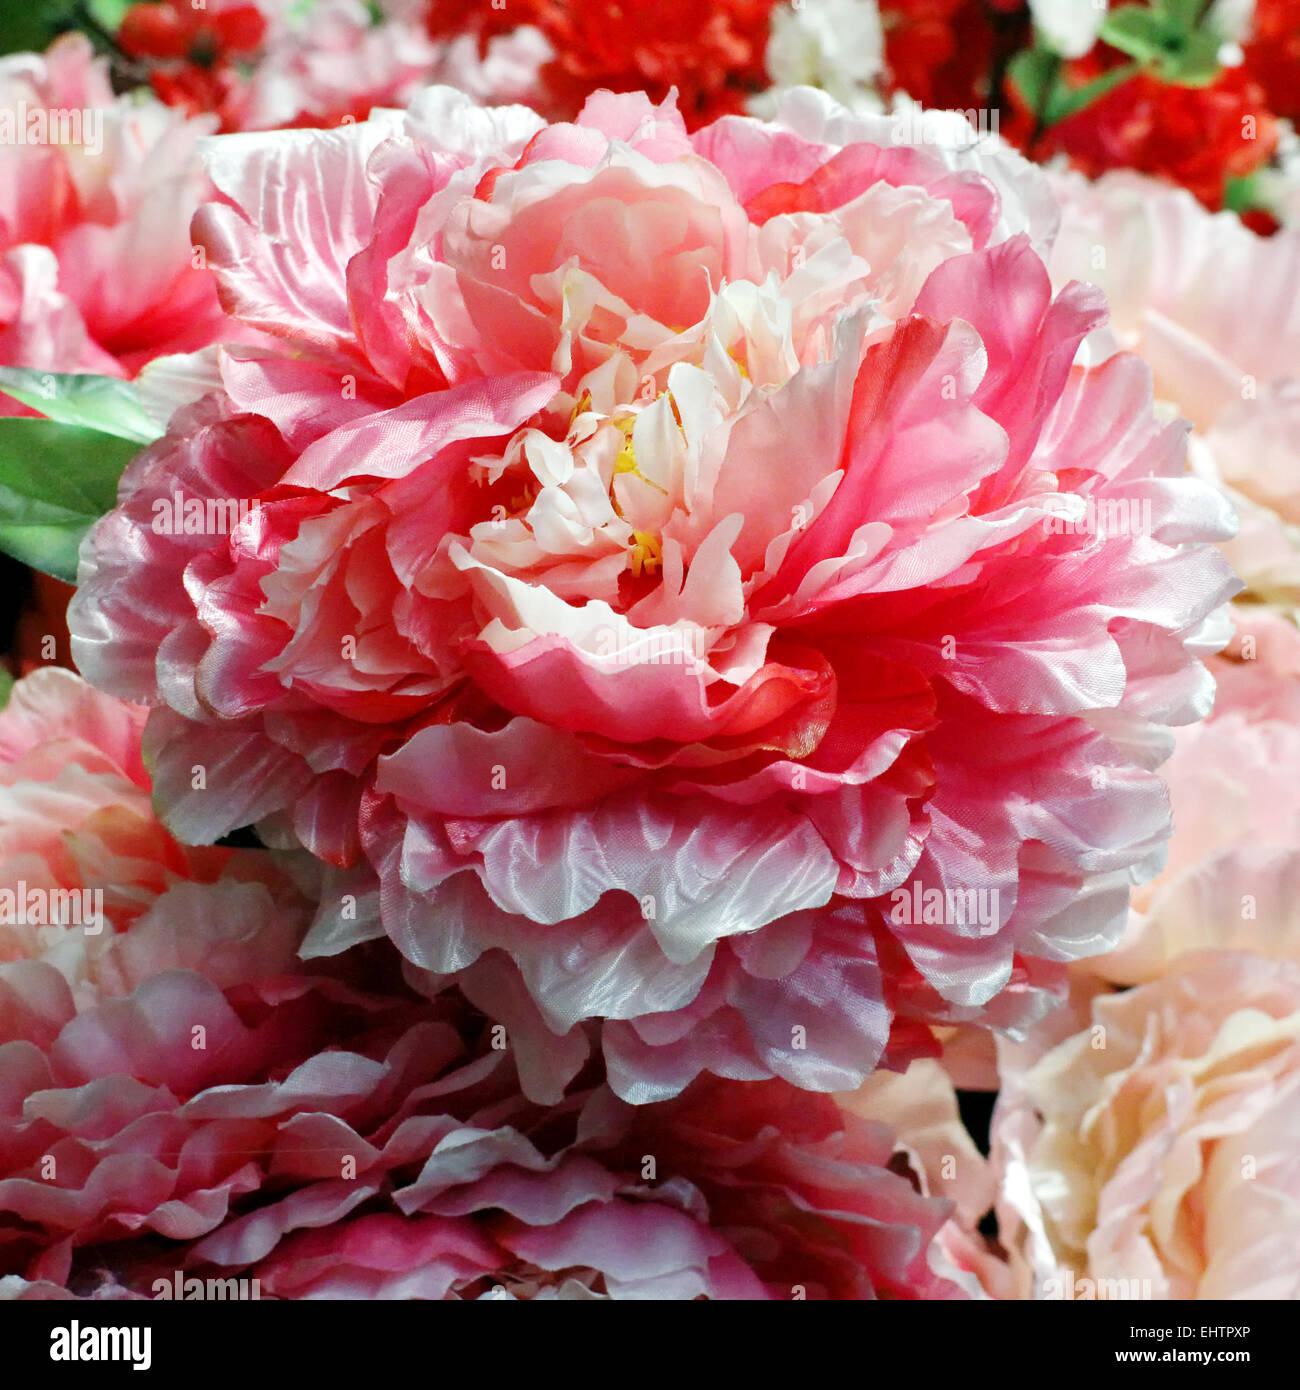 The beautiful decoration artificial flower Stock Photo